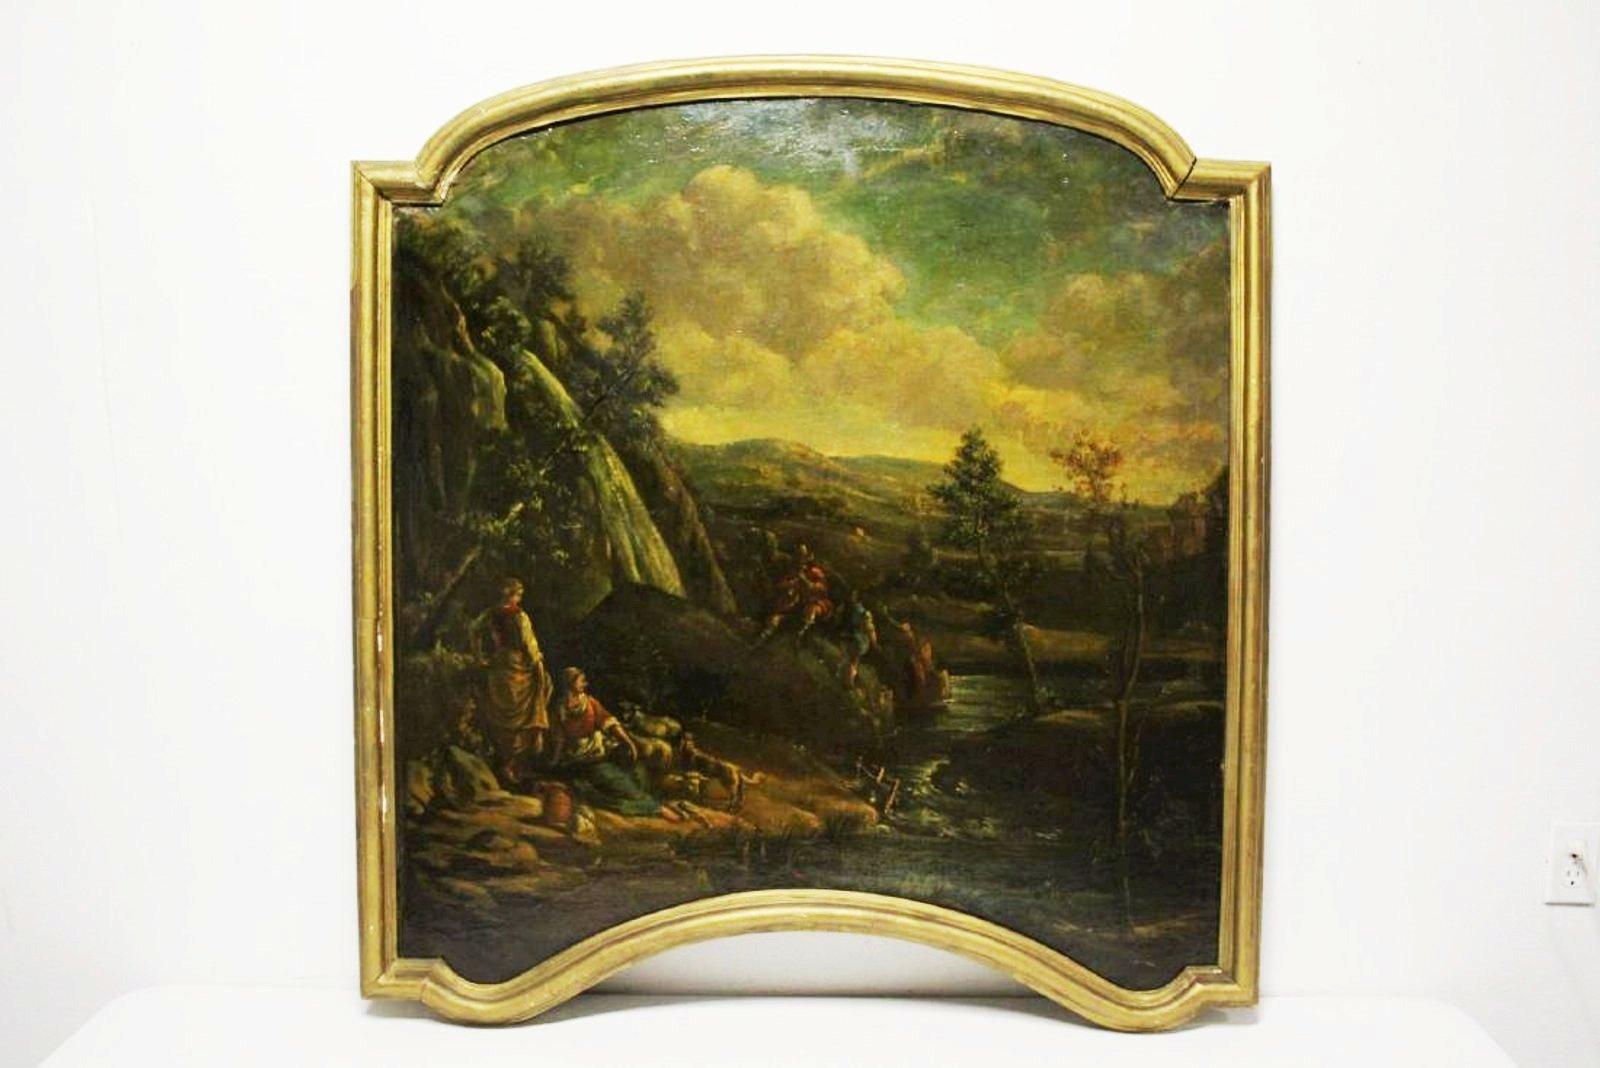 Magnificent opposing pair of 18th century Italian school oil on canvas paintings mounted on boards. 

Both paintings depict a beautiful landscape with flowing streams, waterfalls and mountains. The clouds are robust leaving the sky partially